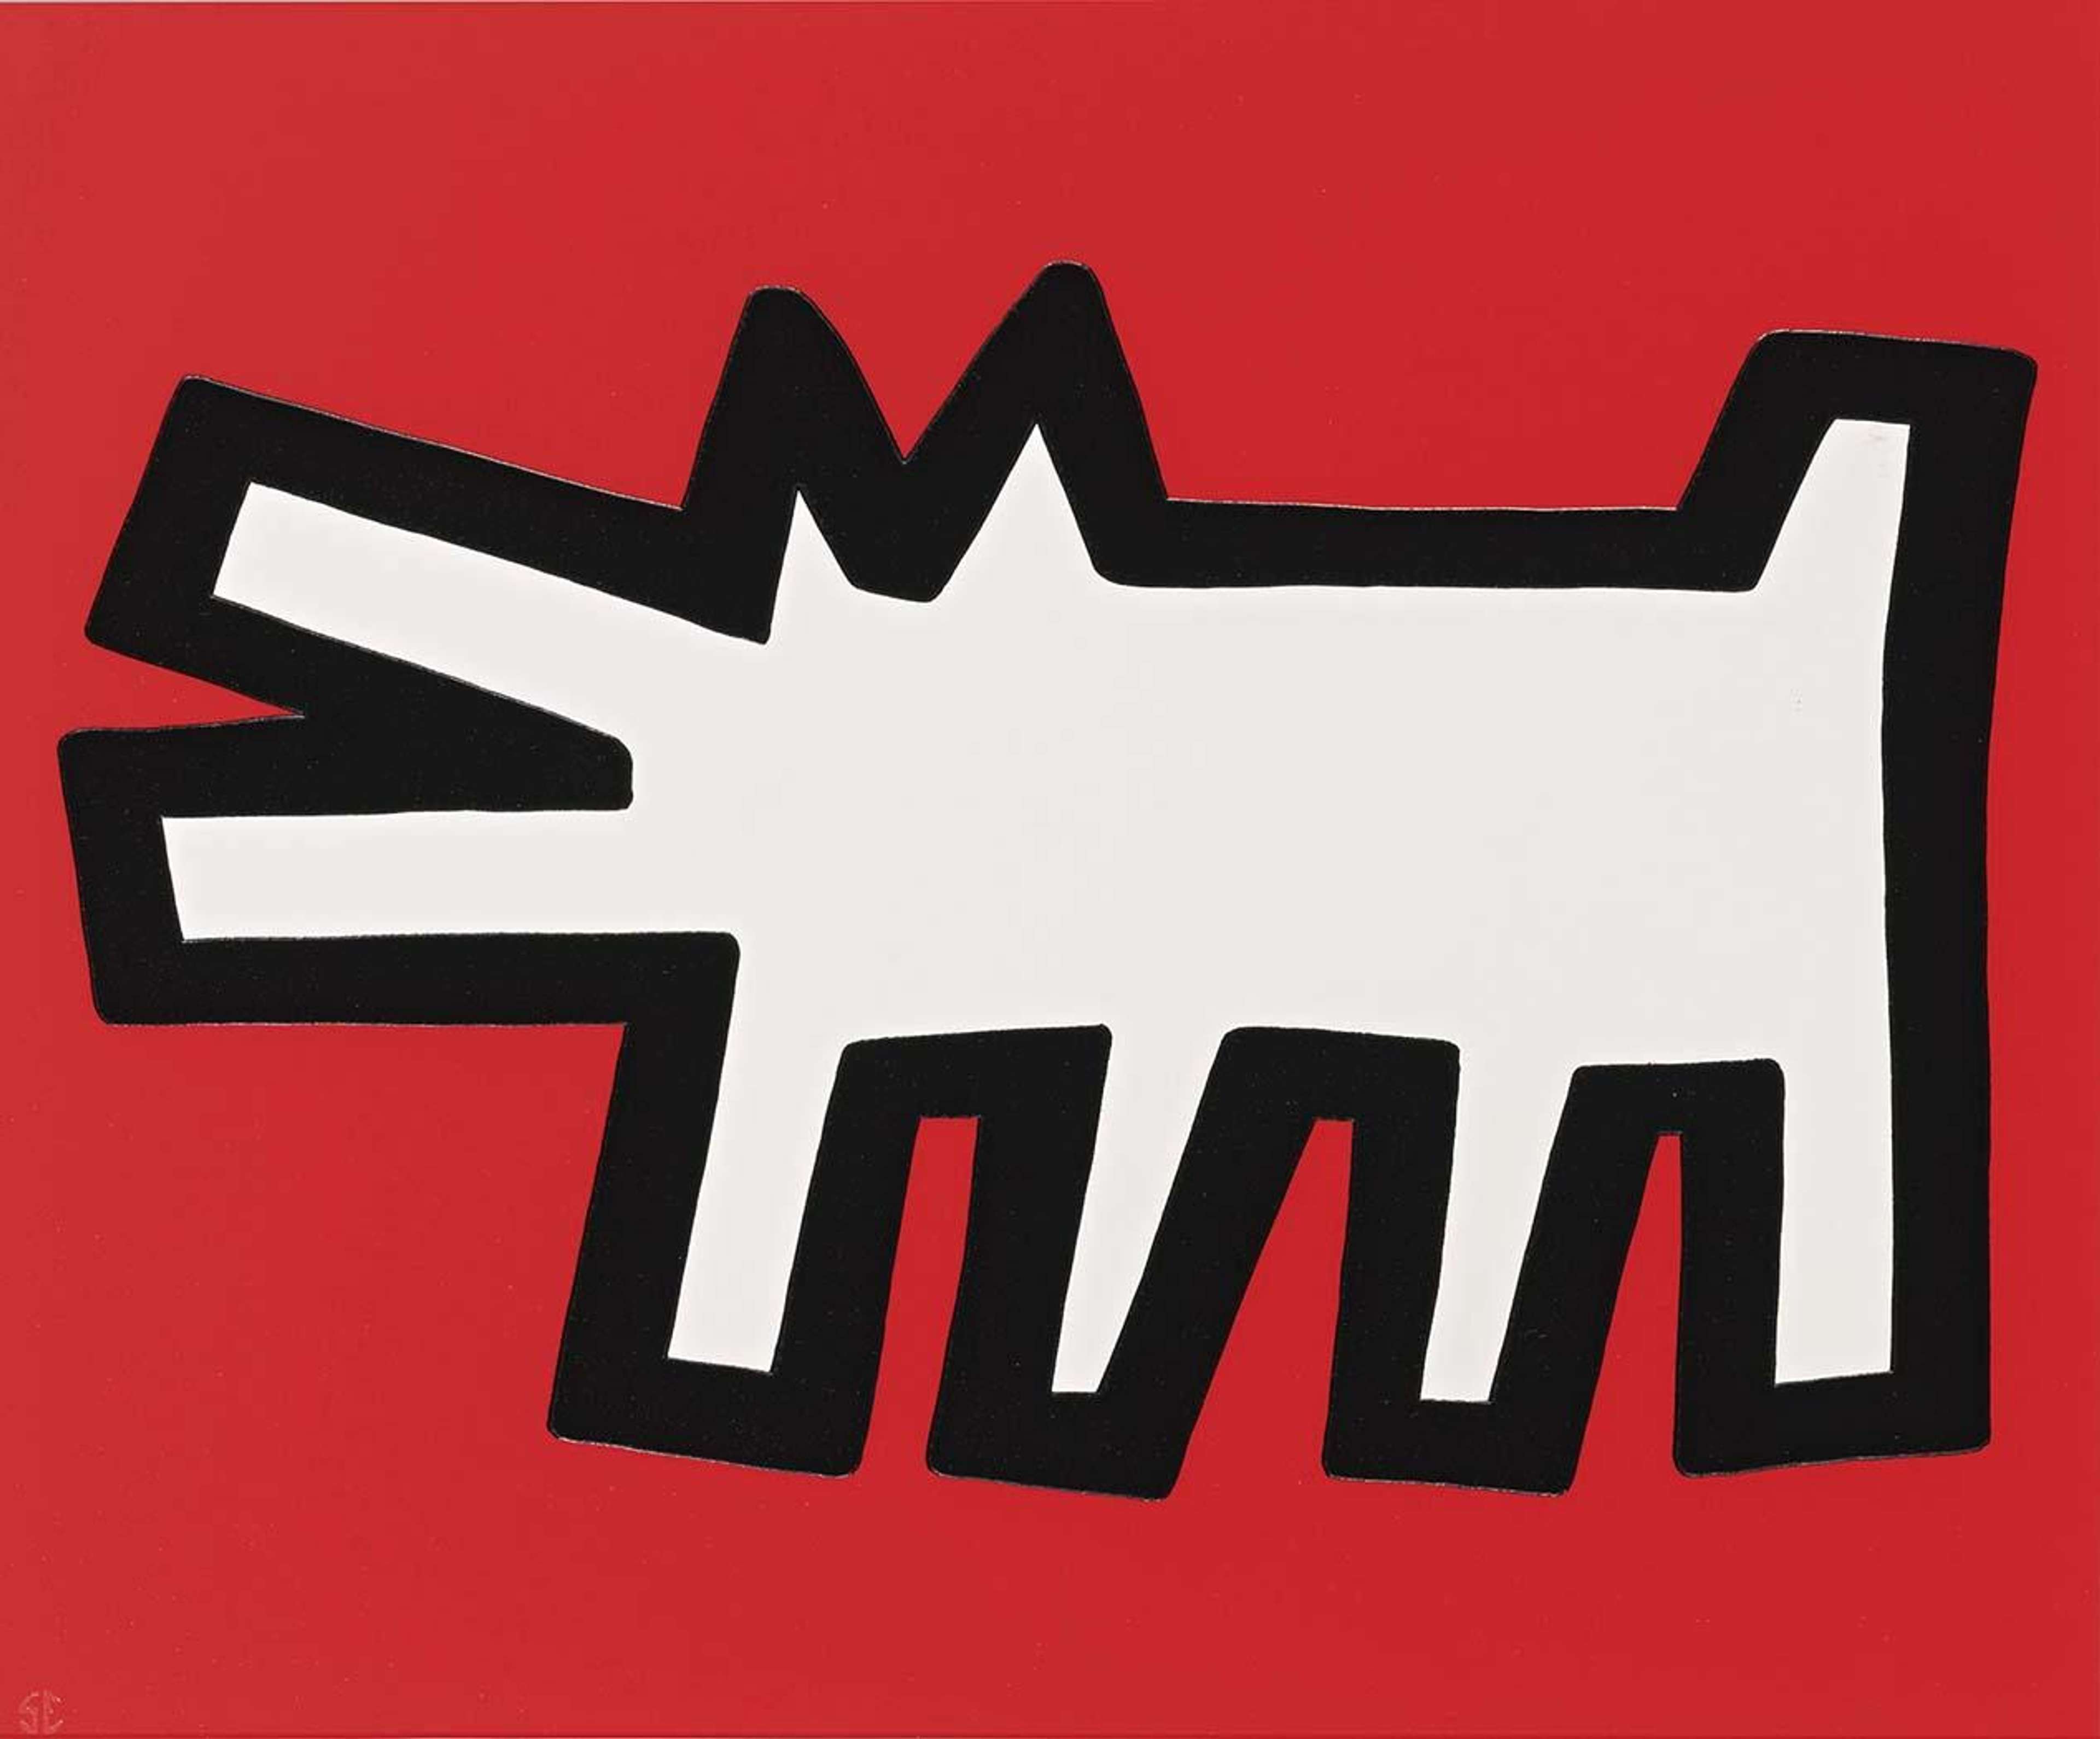 Keith Haring’s Barking Dog. A Pop Art screenprint of a white dog with a black outline in front of a red background.